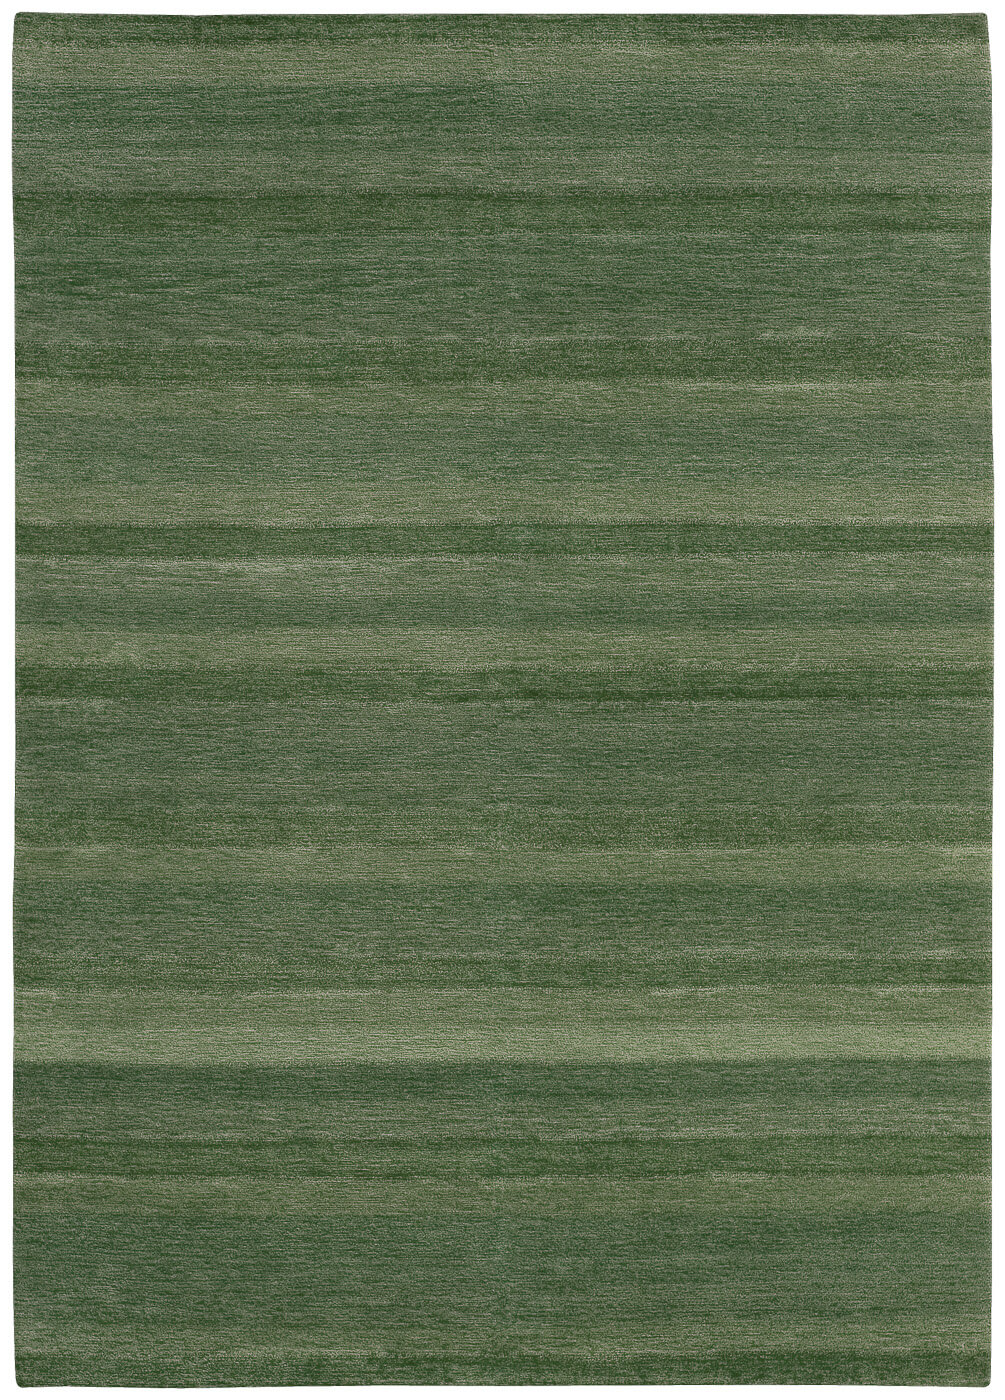 Hand-woven Green Stripes Luxury Rug ☞ Size: 300 x 400 cm